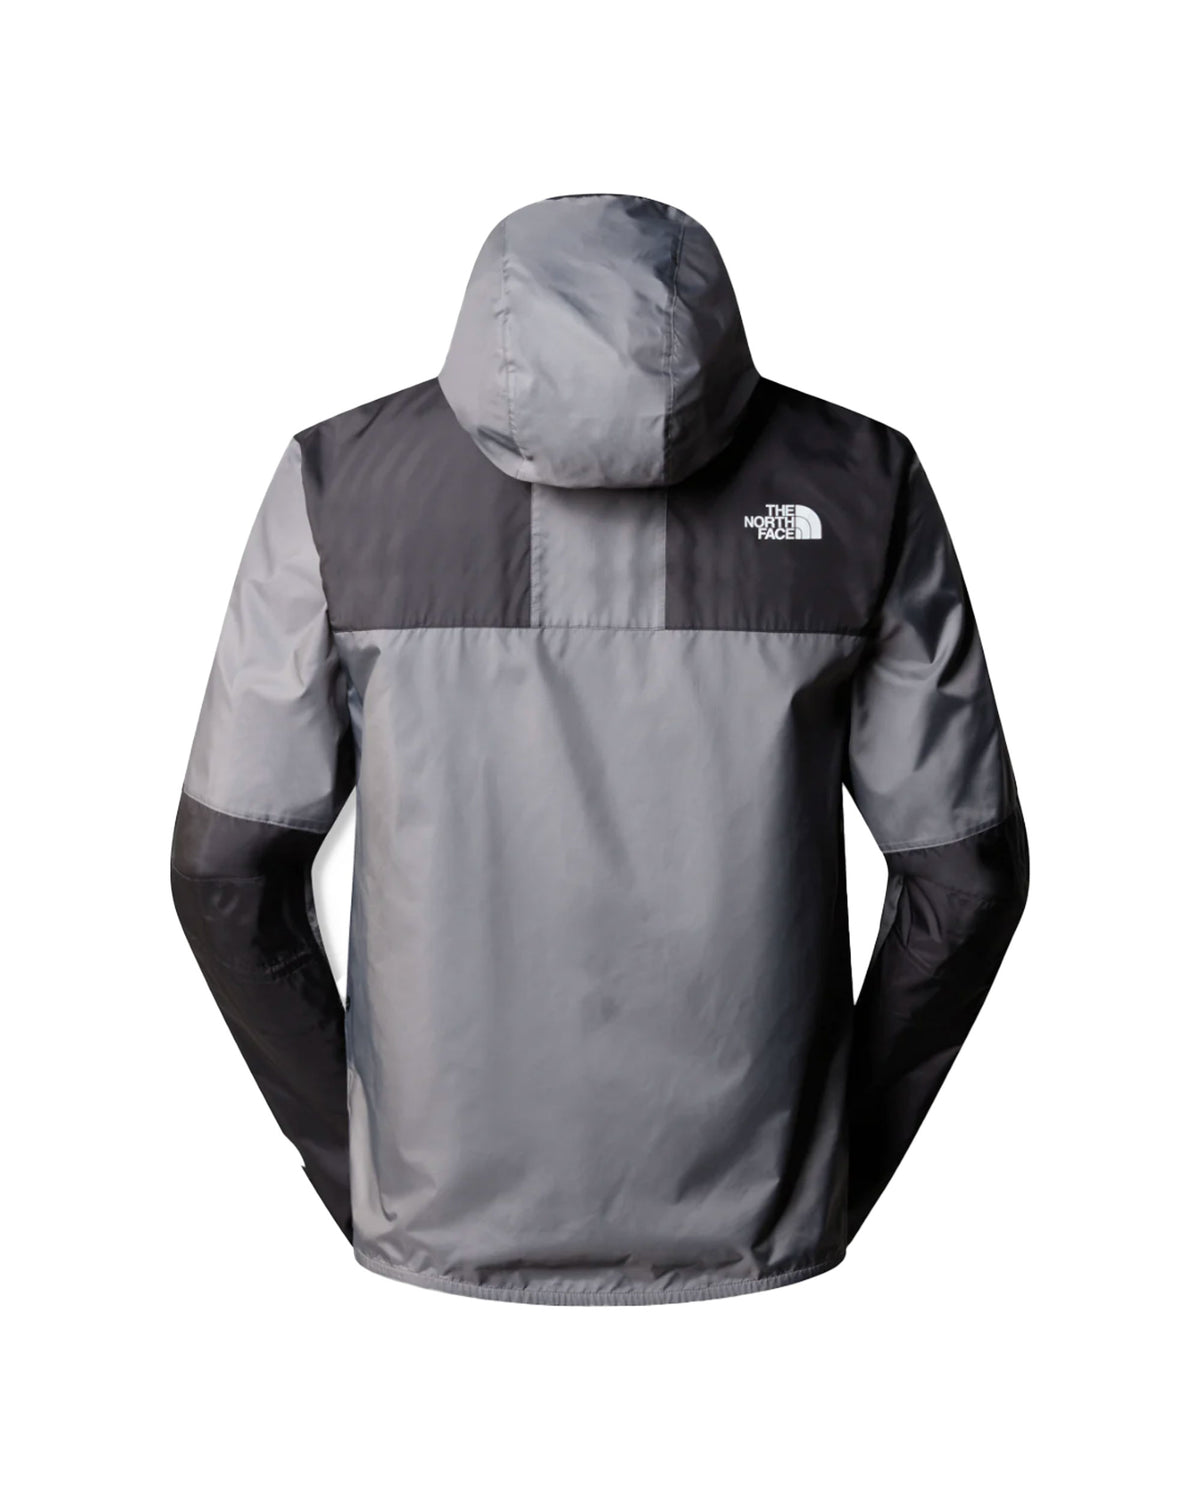 Giacca Uomo The North Face Mountain Jacket Smoked Pearl